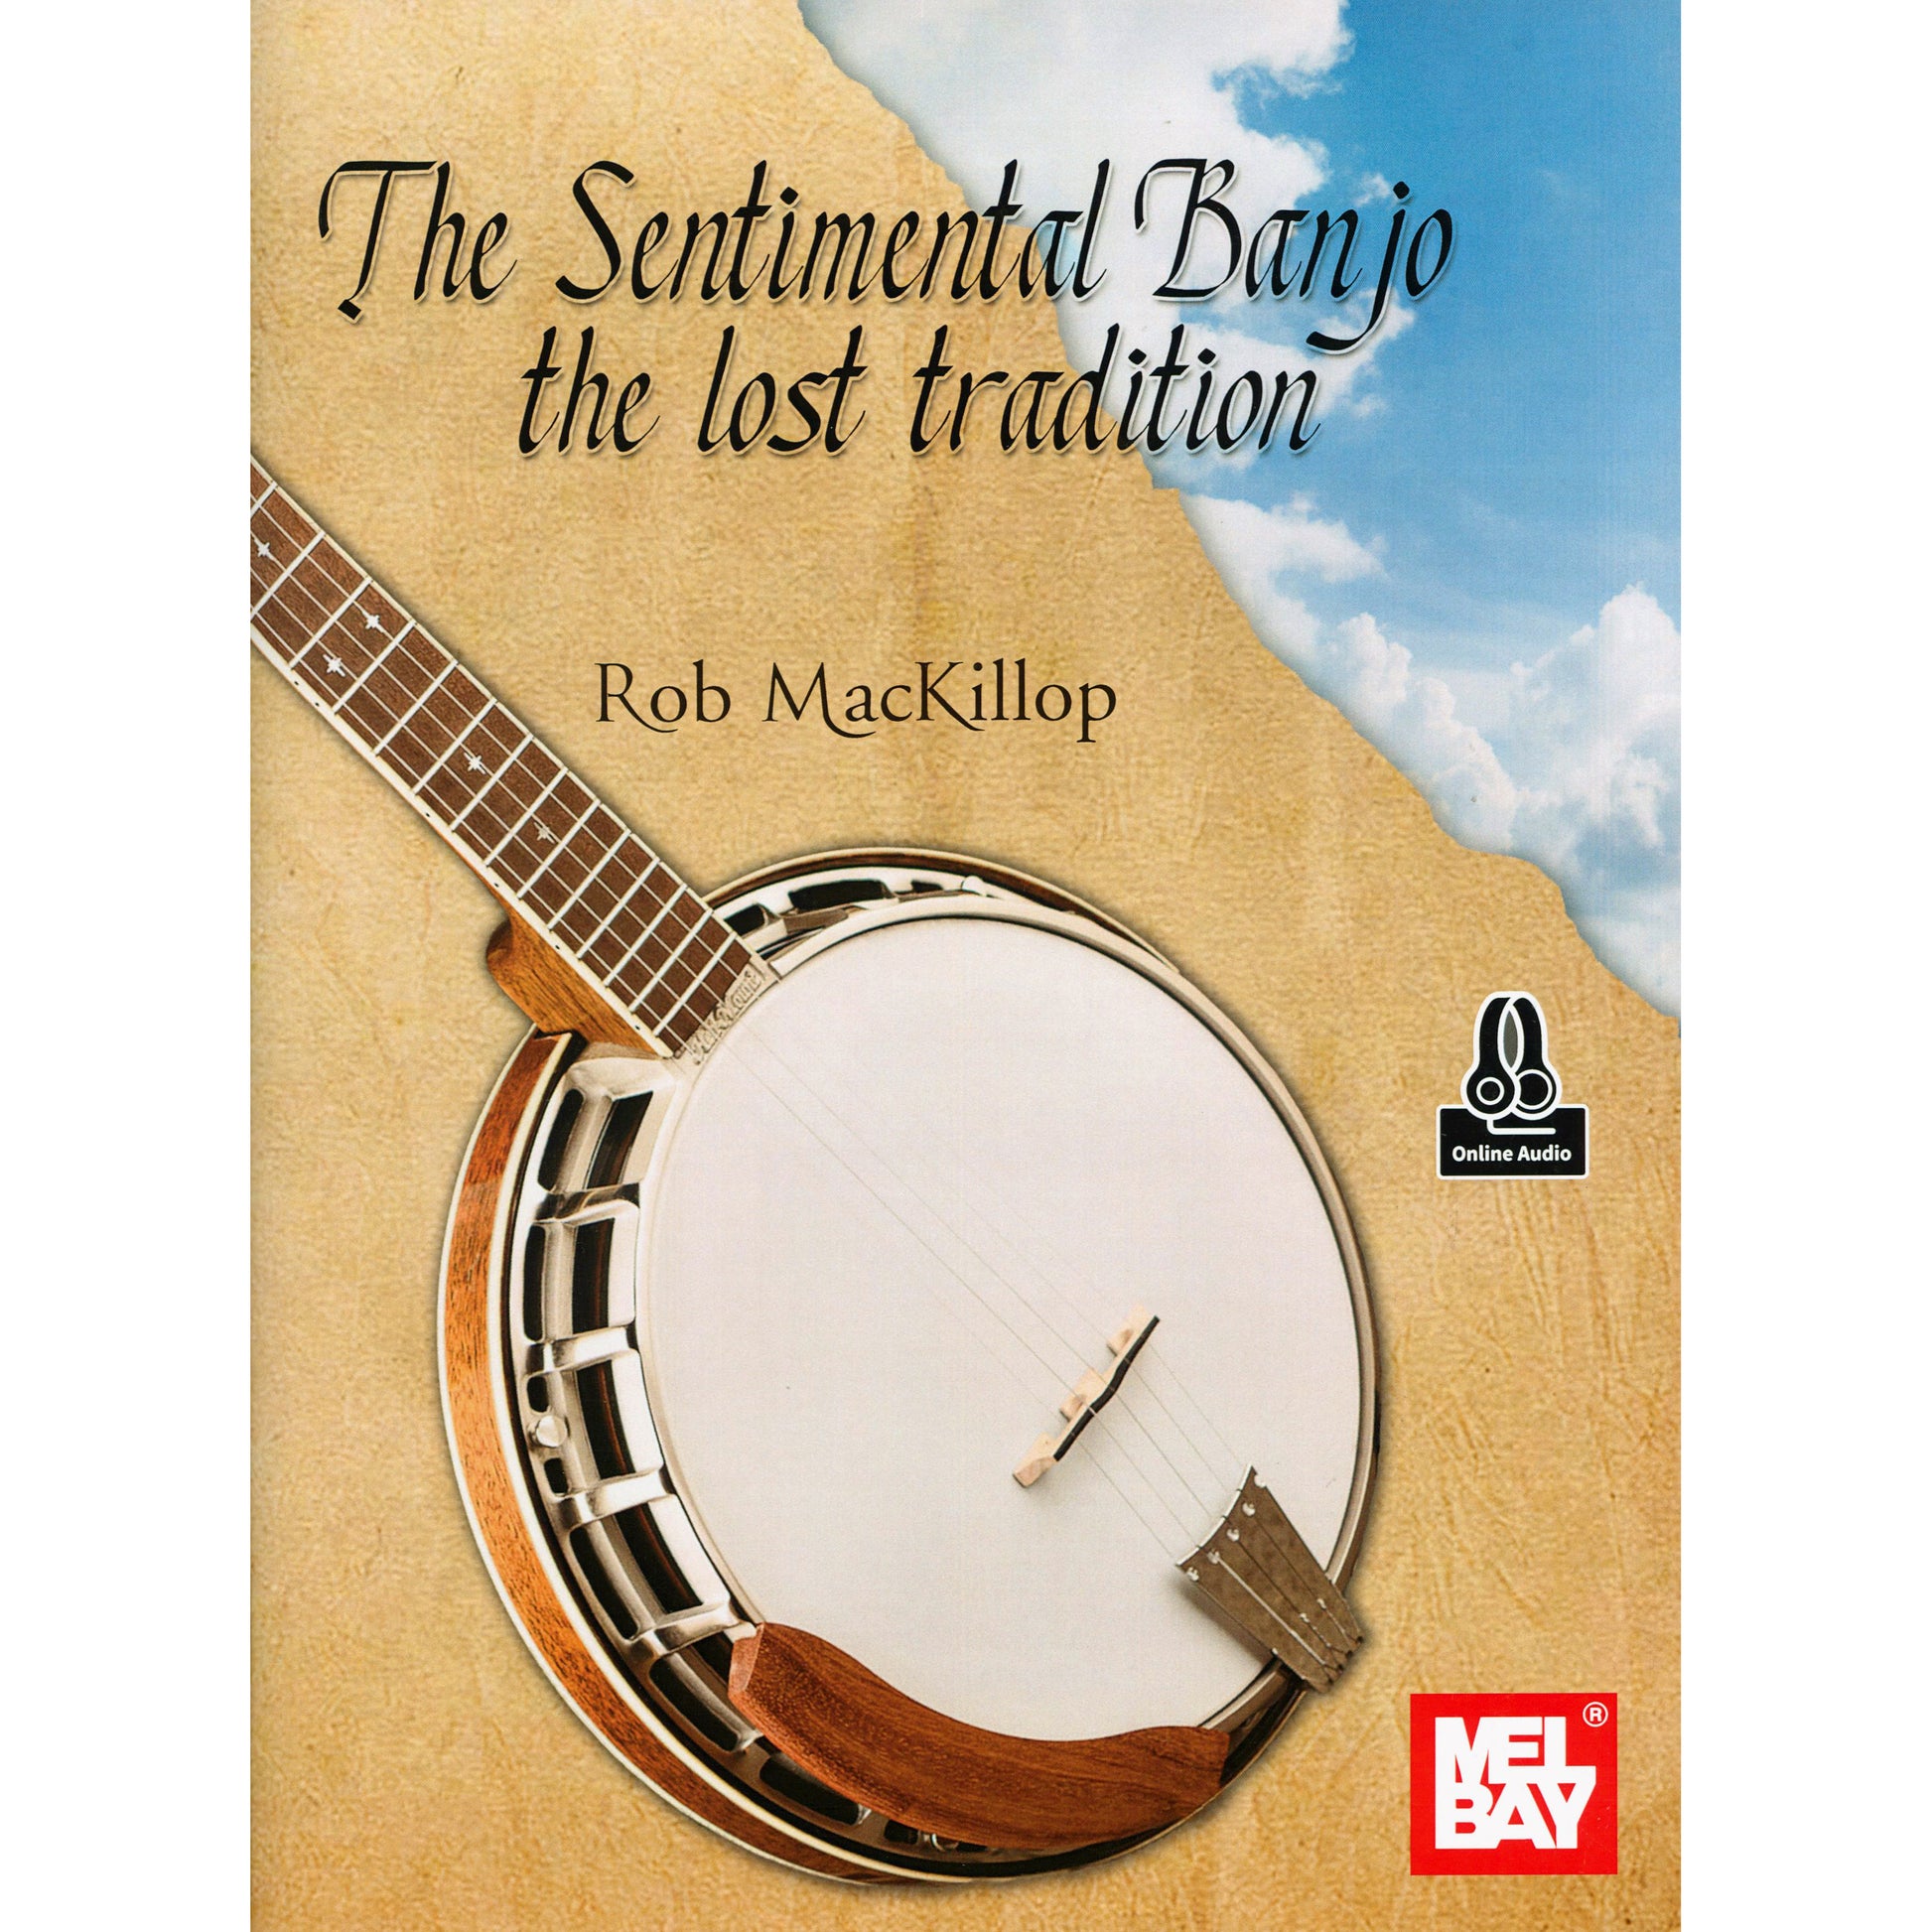 Image 1 of The Sentimental Banjo : The Lost Tradition by Rob MacKillop - SKU# 02-30882M : Product Type Media : Elderly Instruments